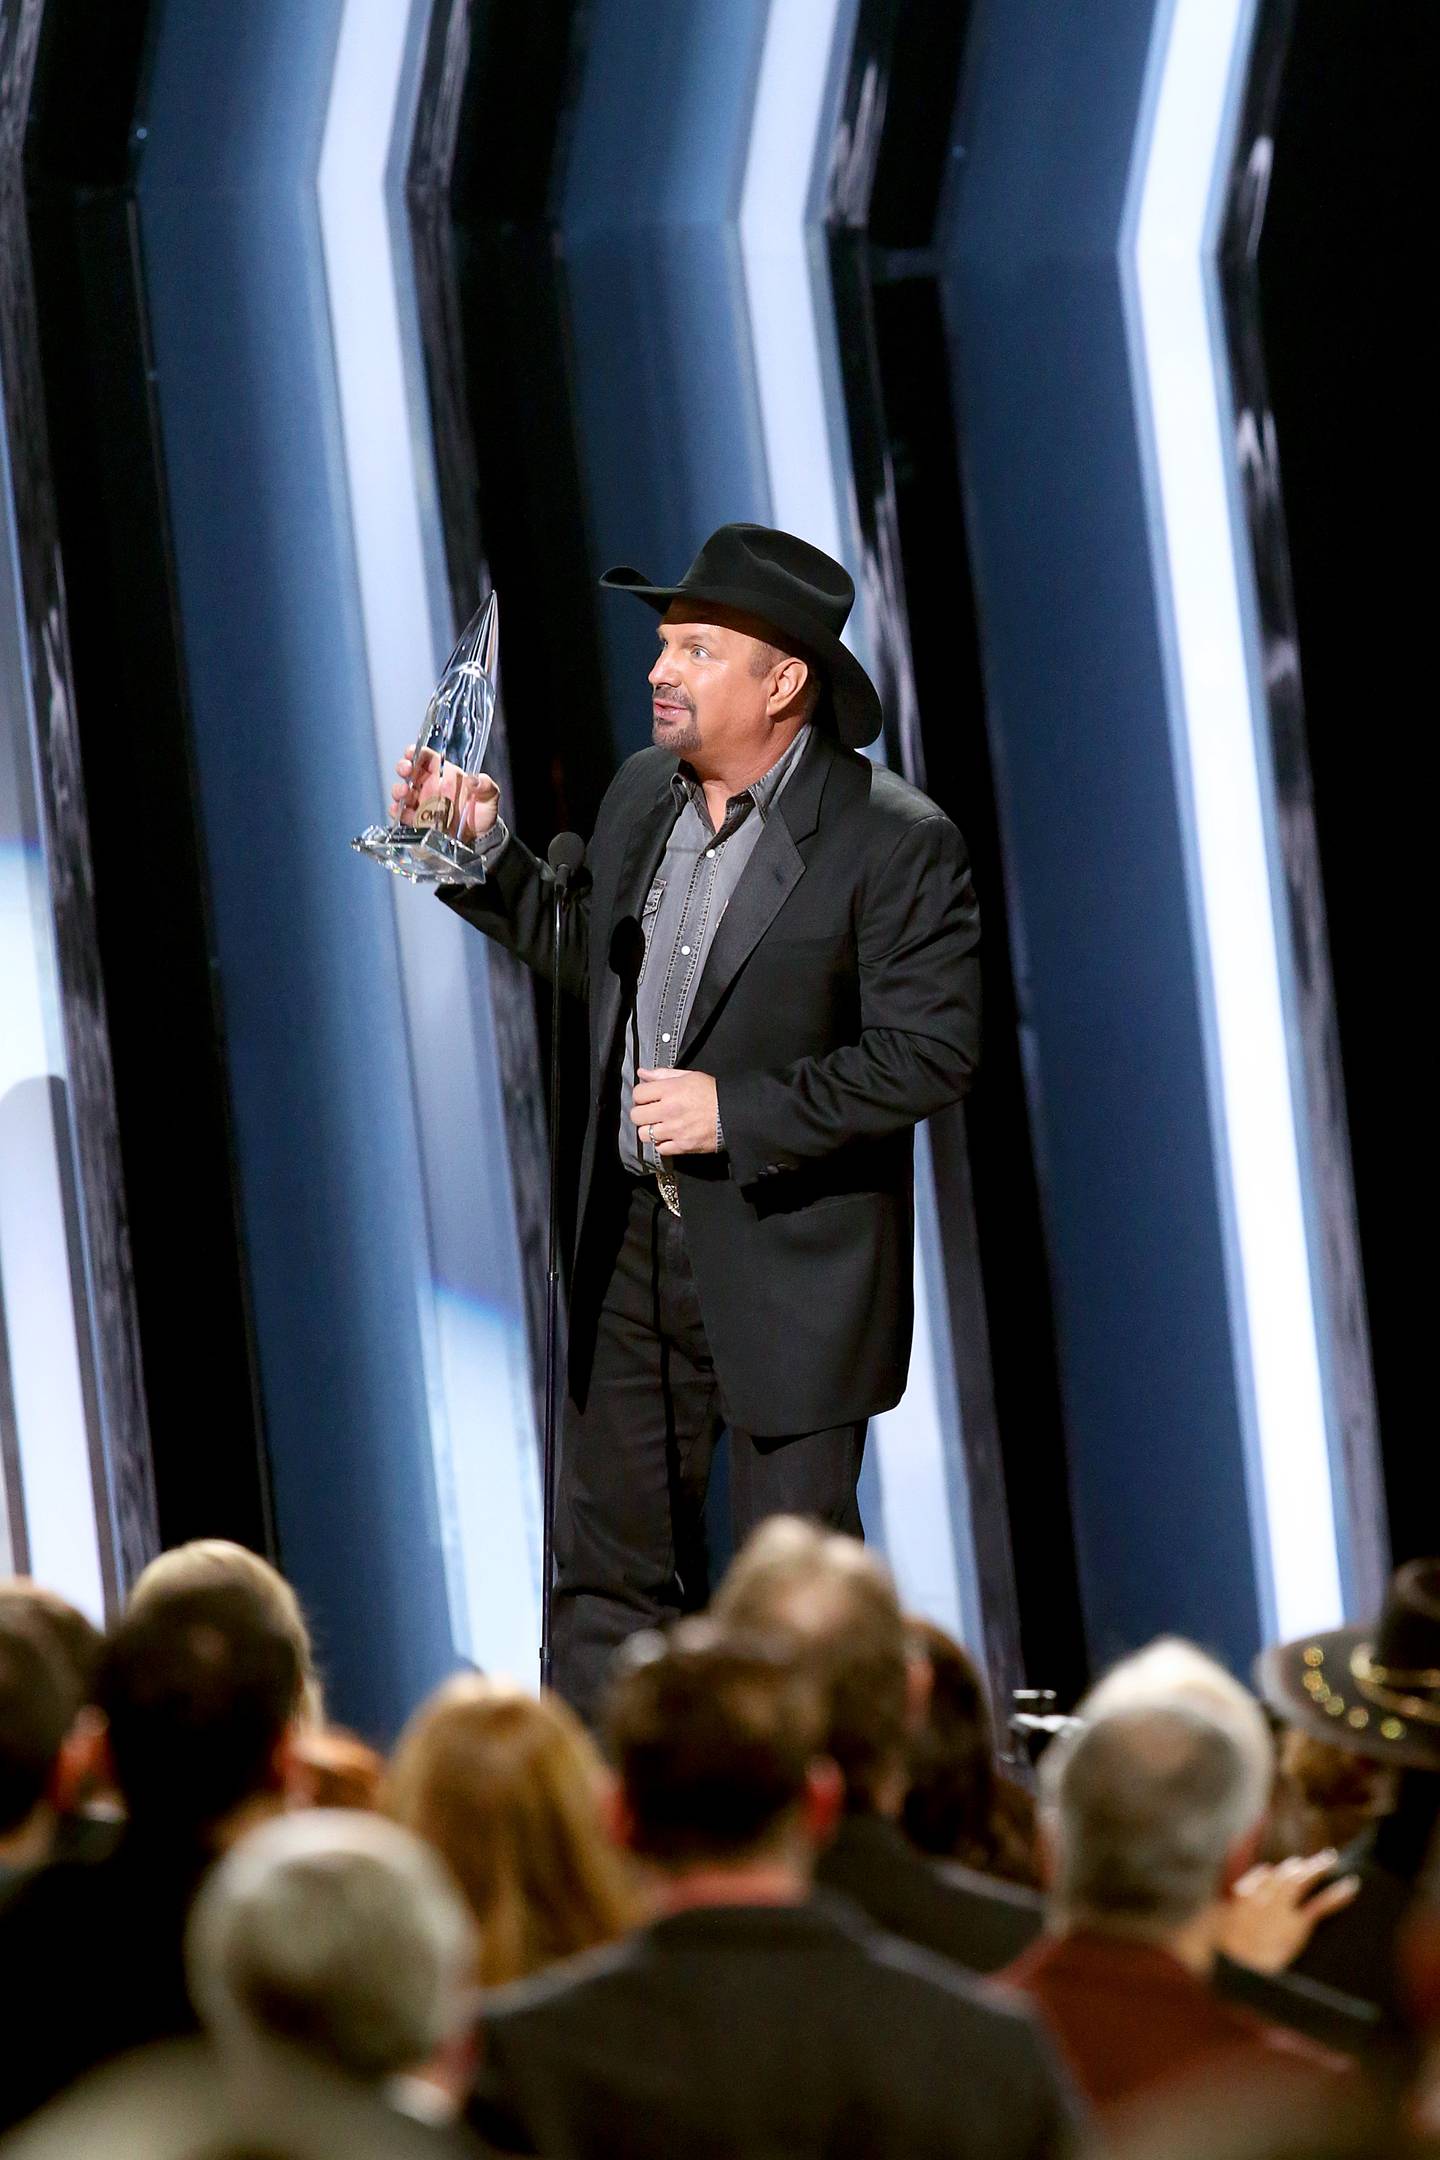 CMA AWARDS Garth Brooks Wins Entertainer of the Year News CMT